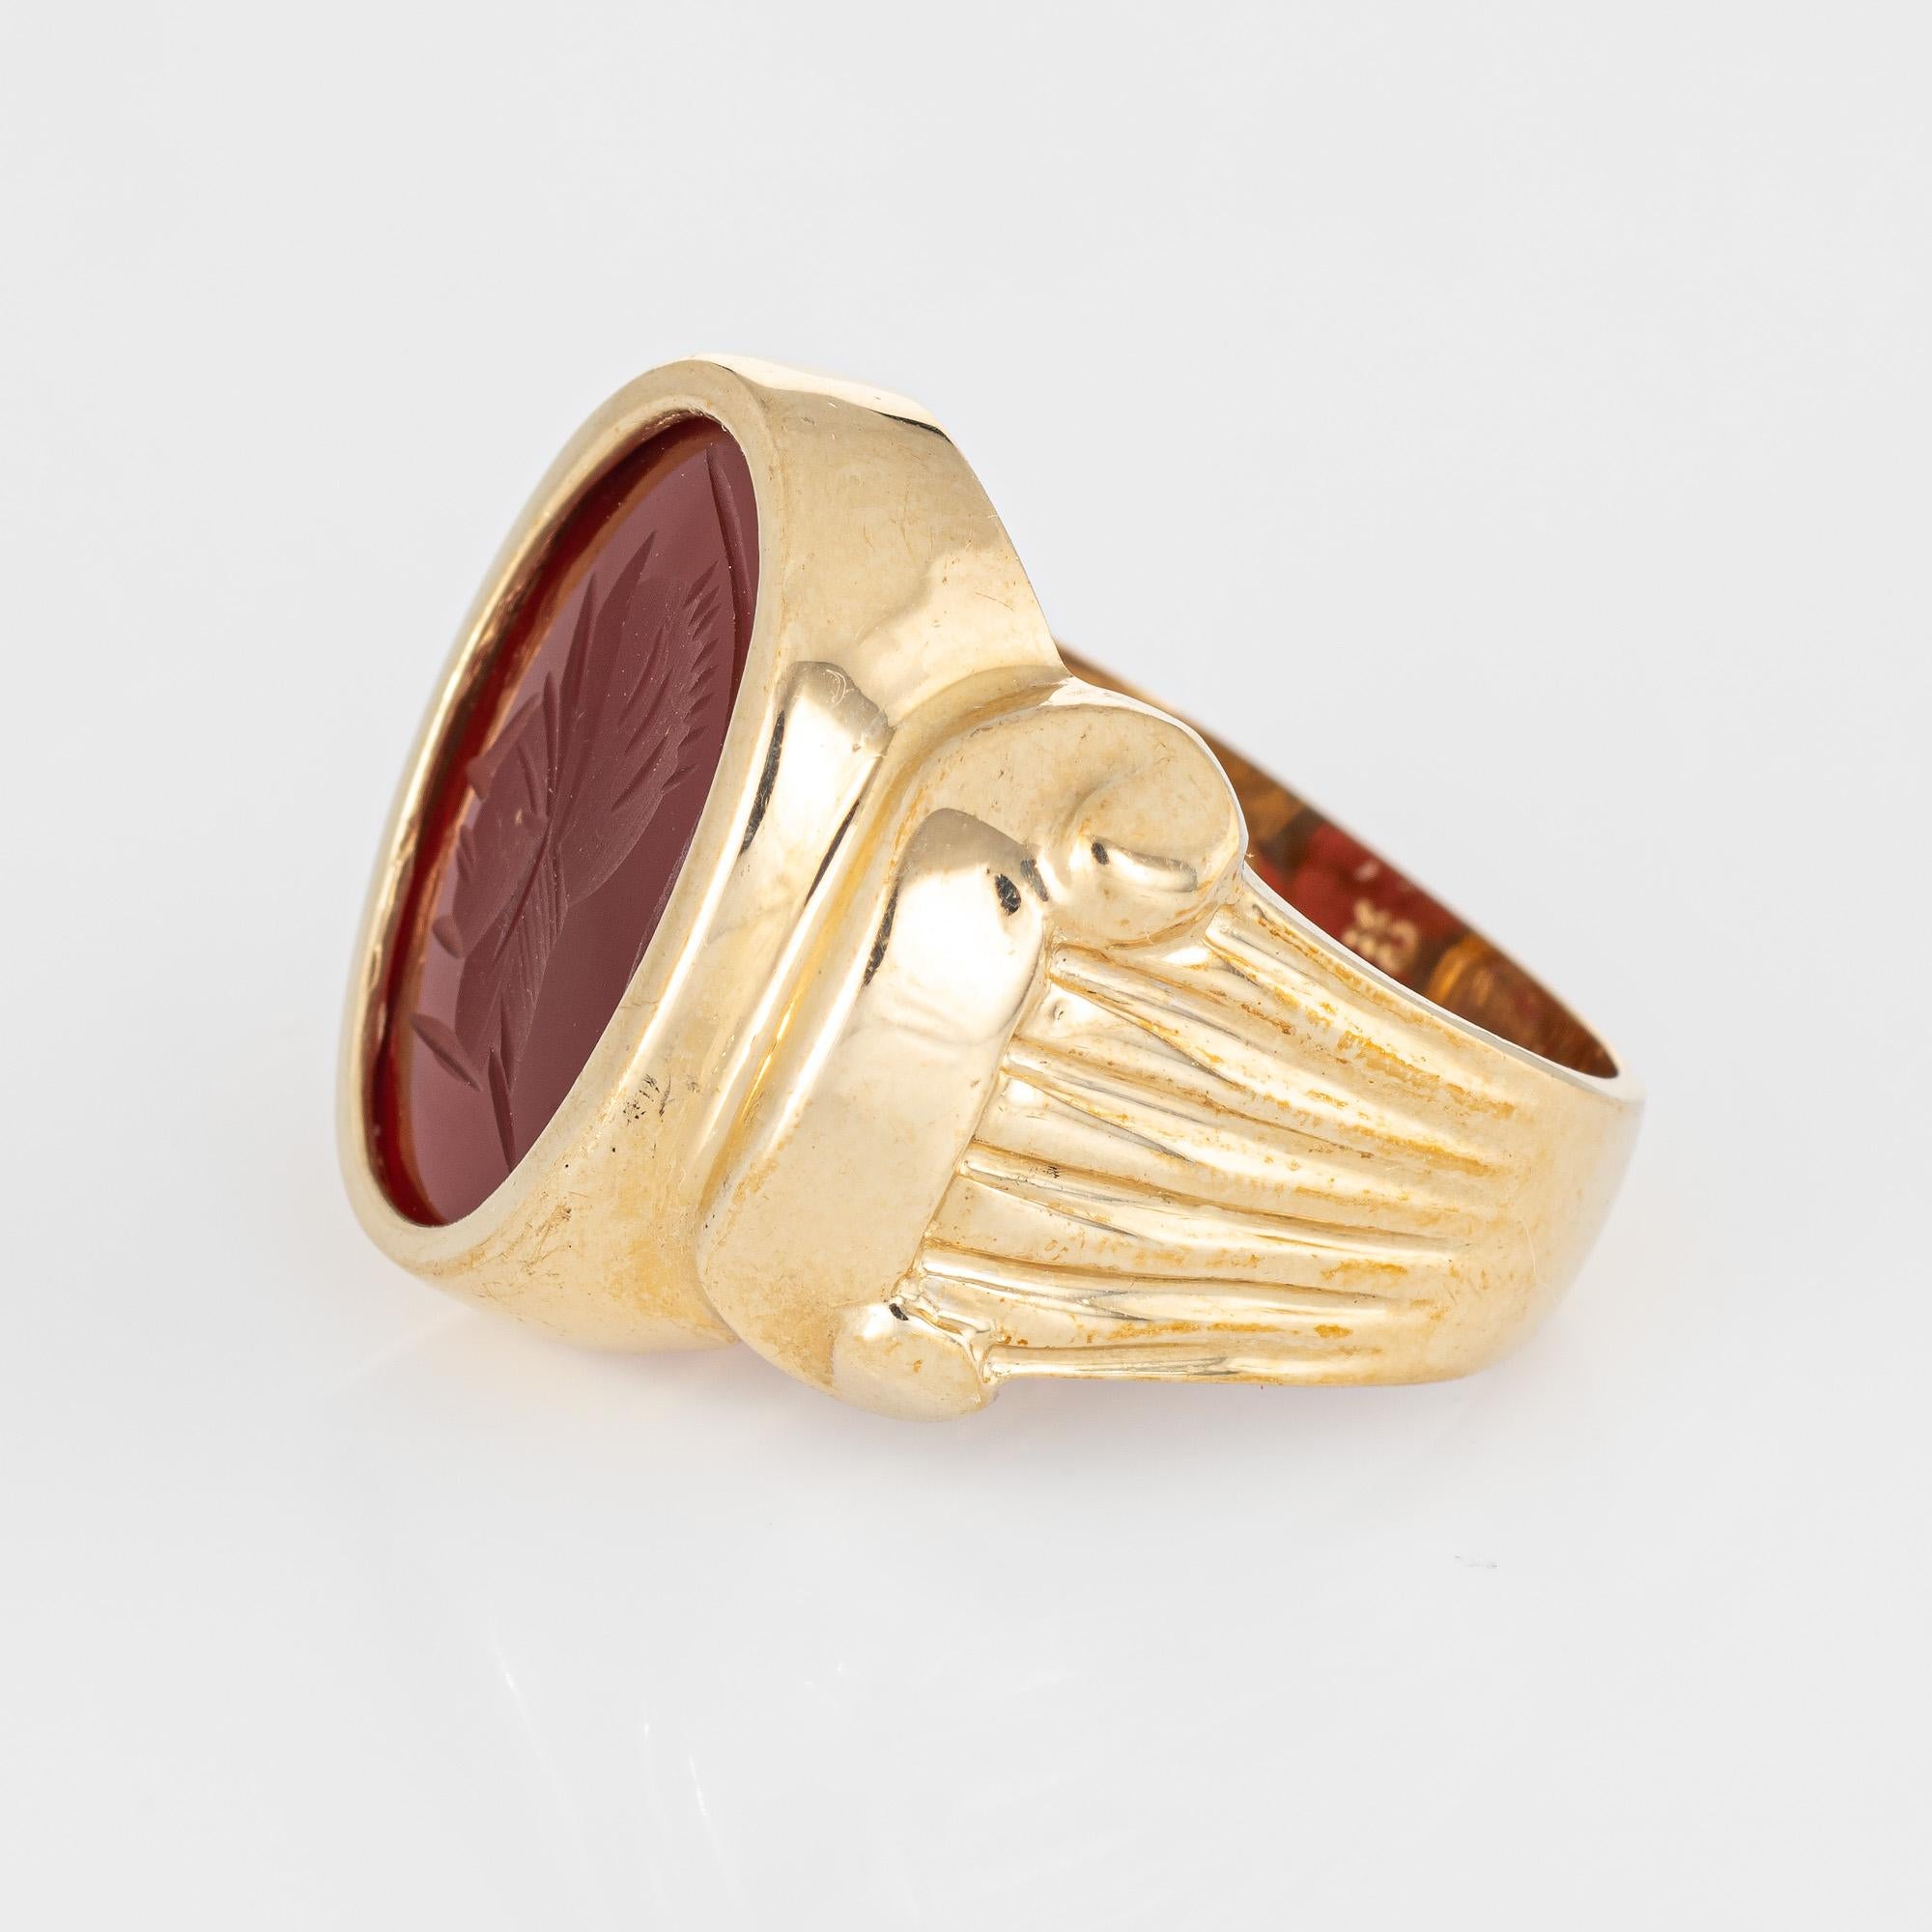 Oval Cut Stylish Vintage Carnelian Intaglio Ring Crafted in 14 Karat Yellow Gold